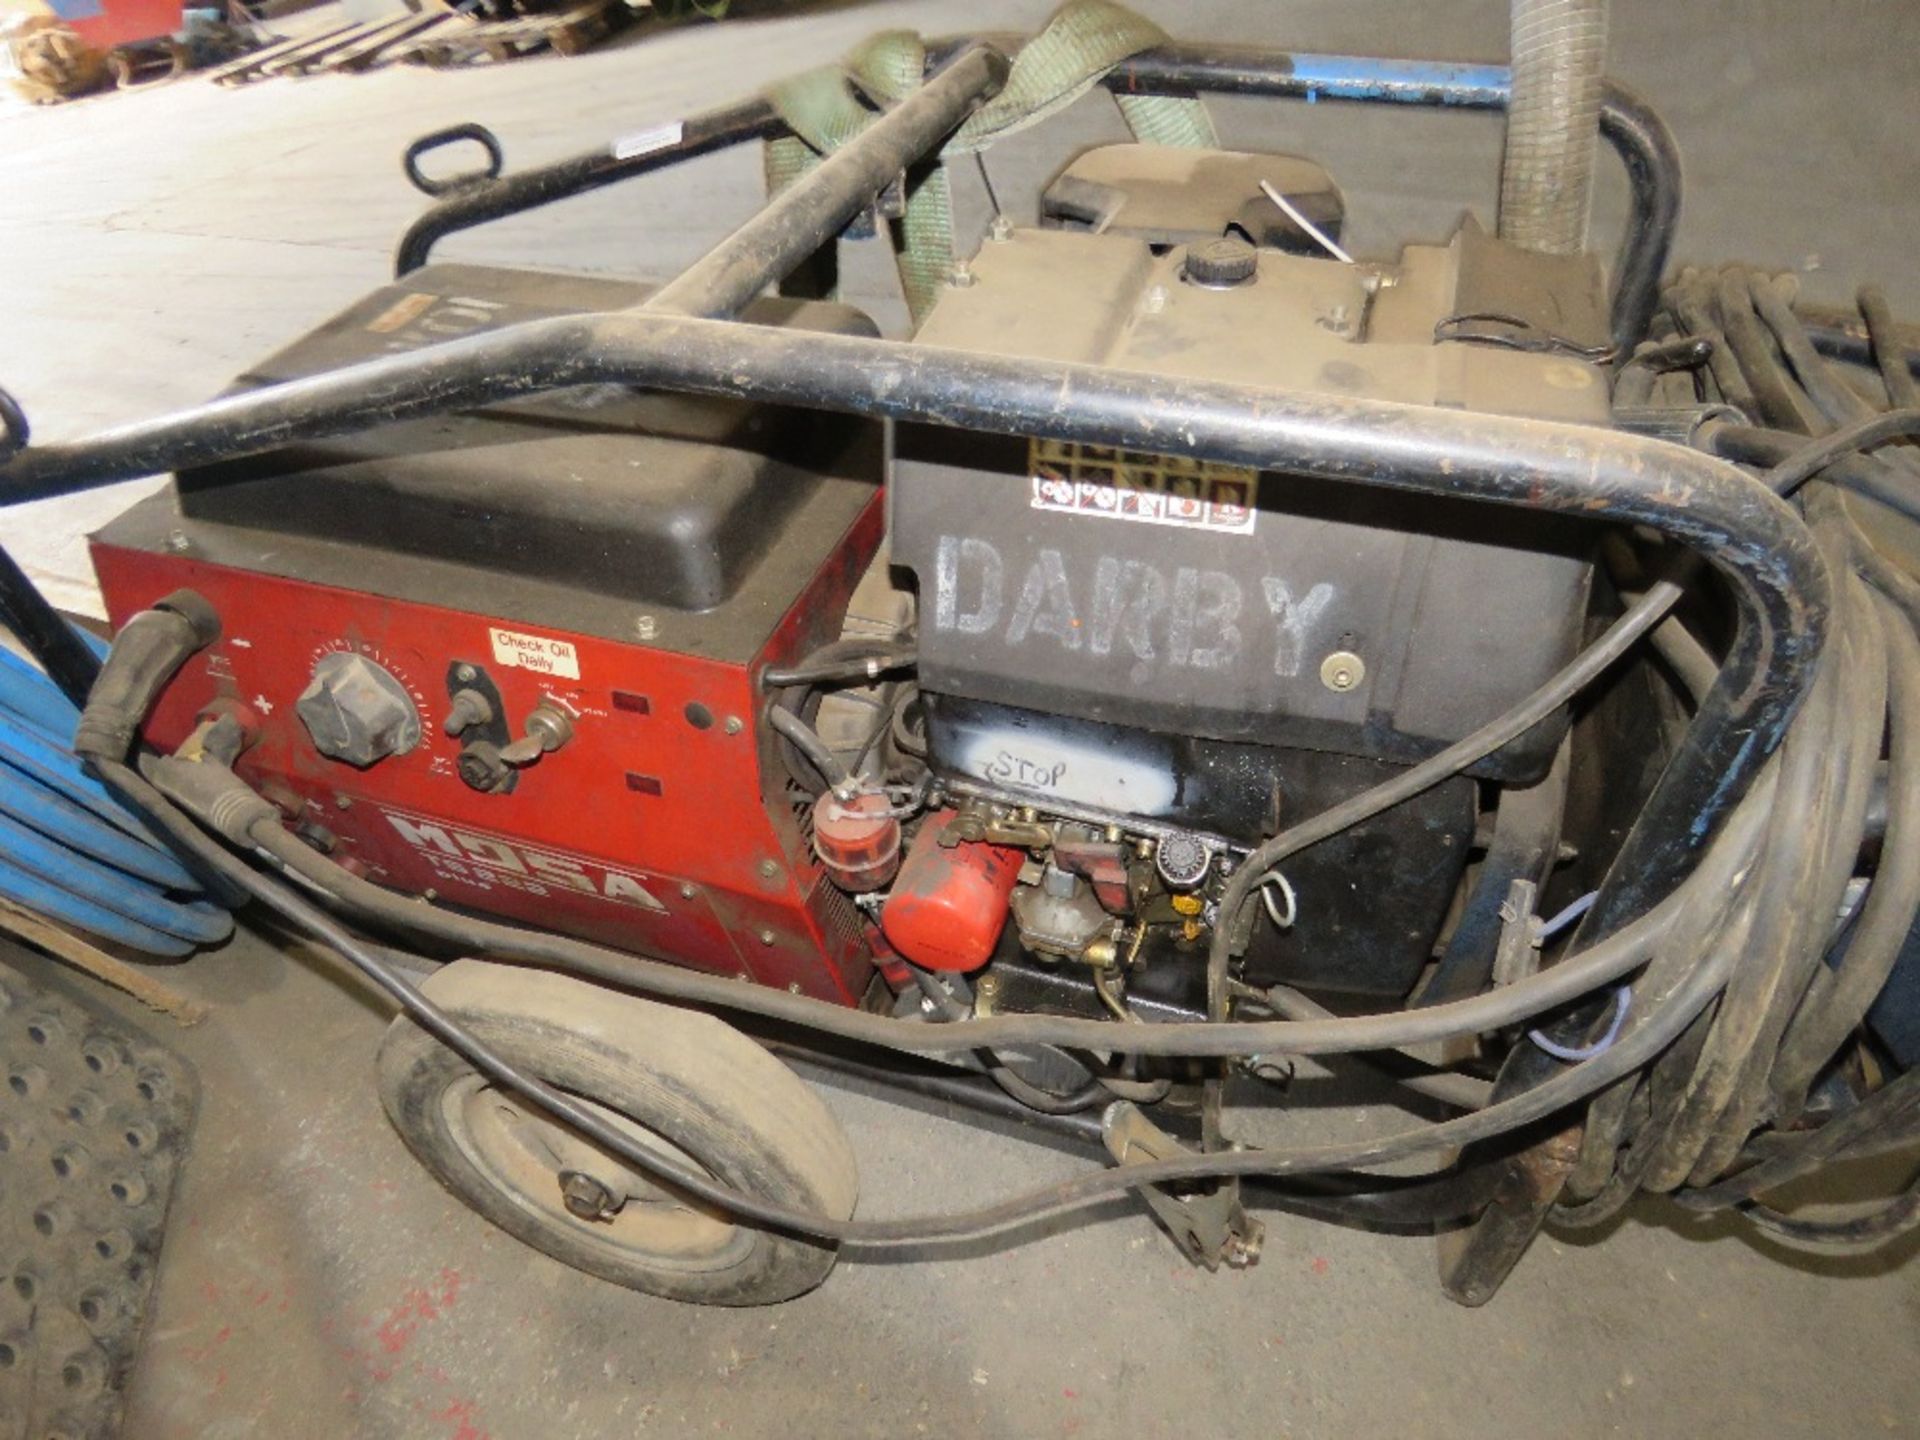 MOSA DIESEL POWERED WELDER WITH LEADS. LOT LOCATION: SS13 1EF, BASILDON, ESSEX. - Image 3 of 3